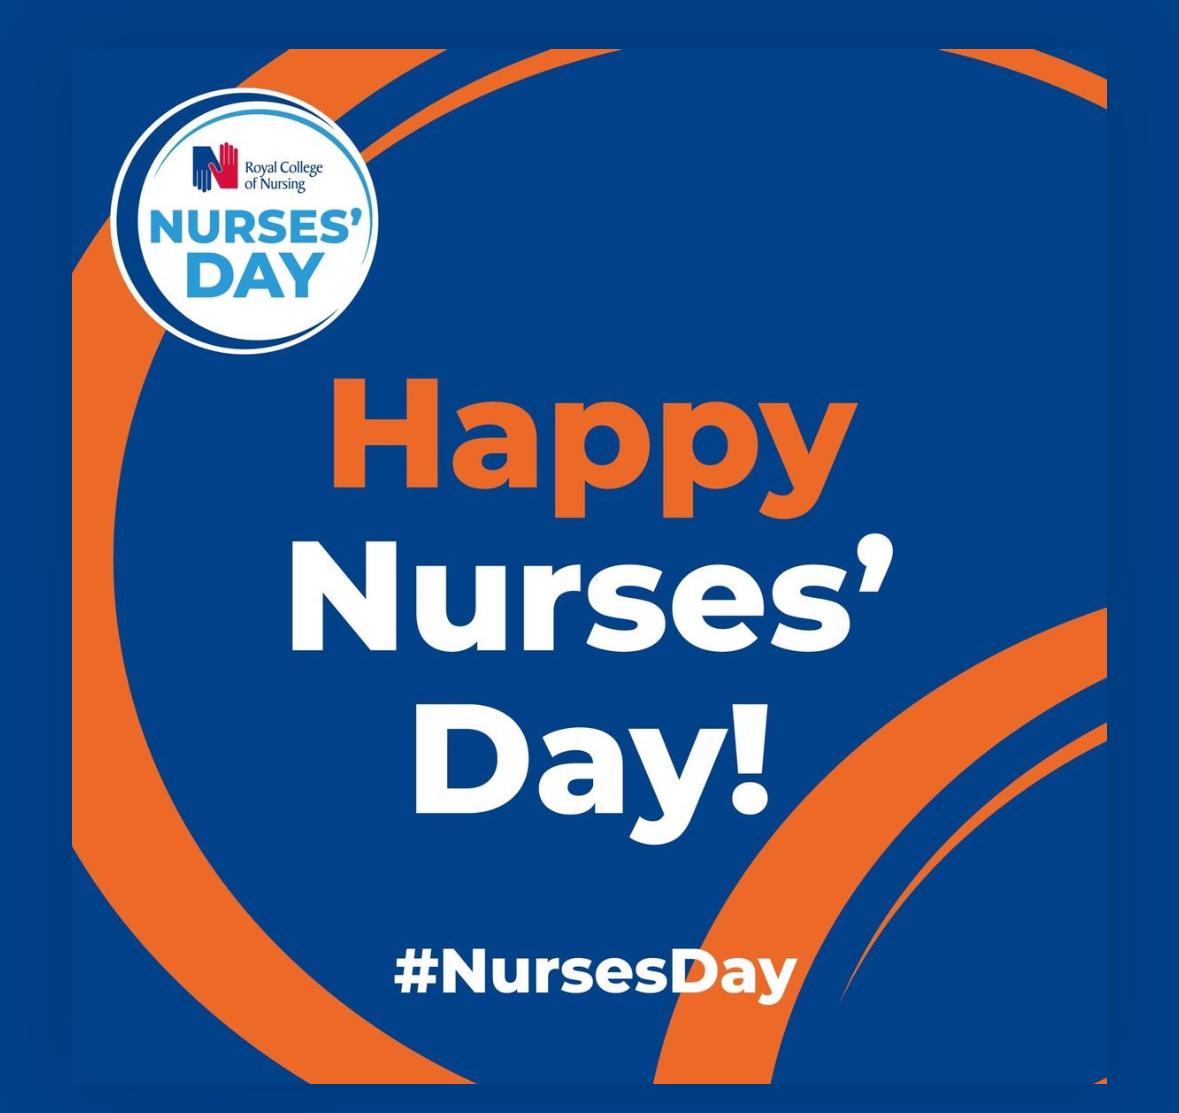 Cheers to the unsung superheroes of the NHS! Your superpowers include patience, empathy, and an endless supply of caffeine. Here's to all the times you've saved the day (and probably a few cups of tea). Happy Nurses Day to our real-life superheroes! #NursesDay #NHSHeroes 💙🦸🏼‍♀️🦸🏽‍♀️